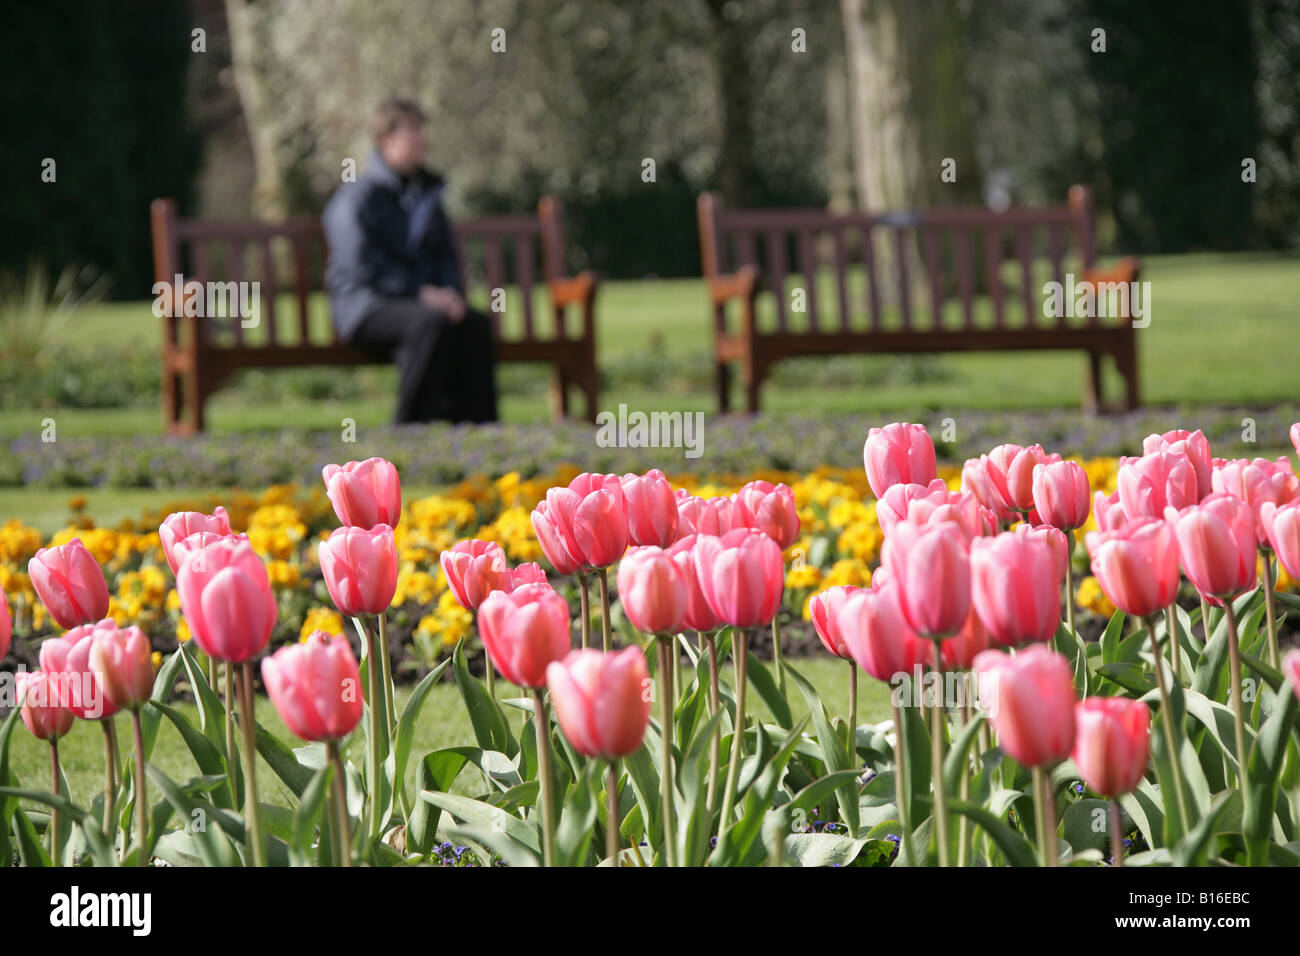 City of Chester, England. Early morning view of spring tulips in Chester Grosvenor Park with lady sitting on park bench. Stock Photo